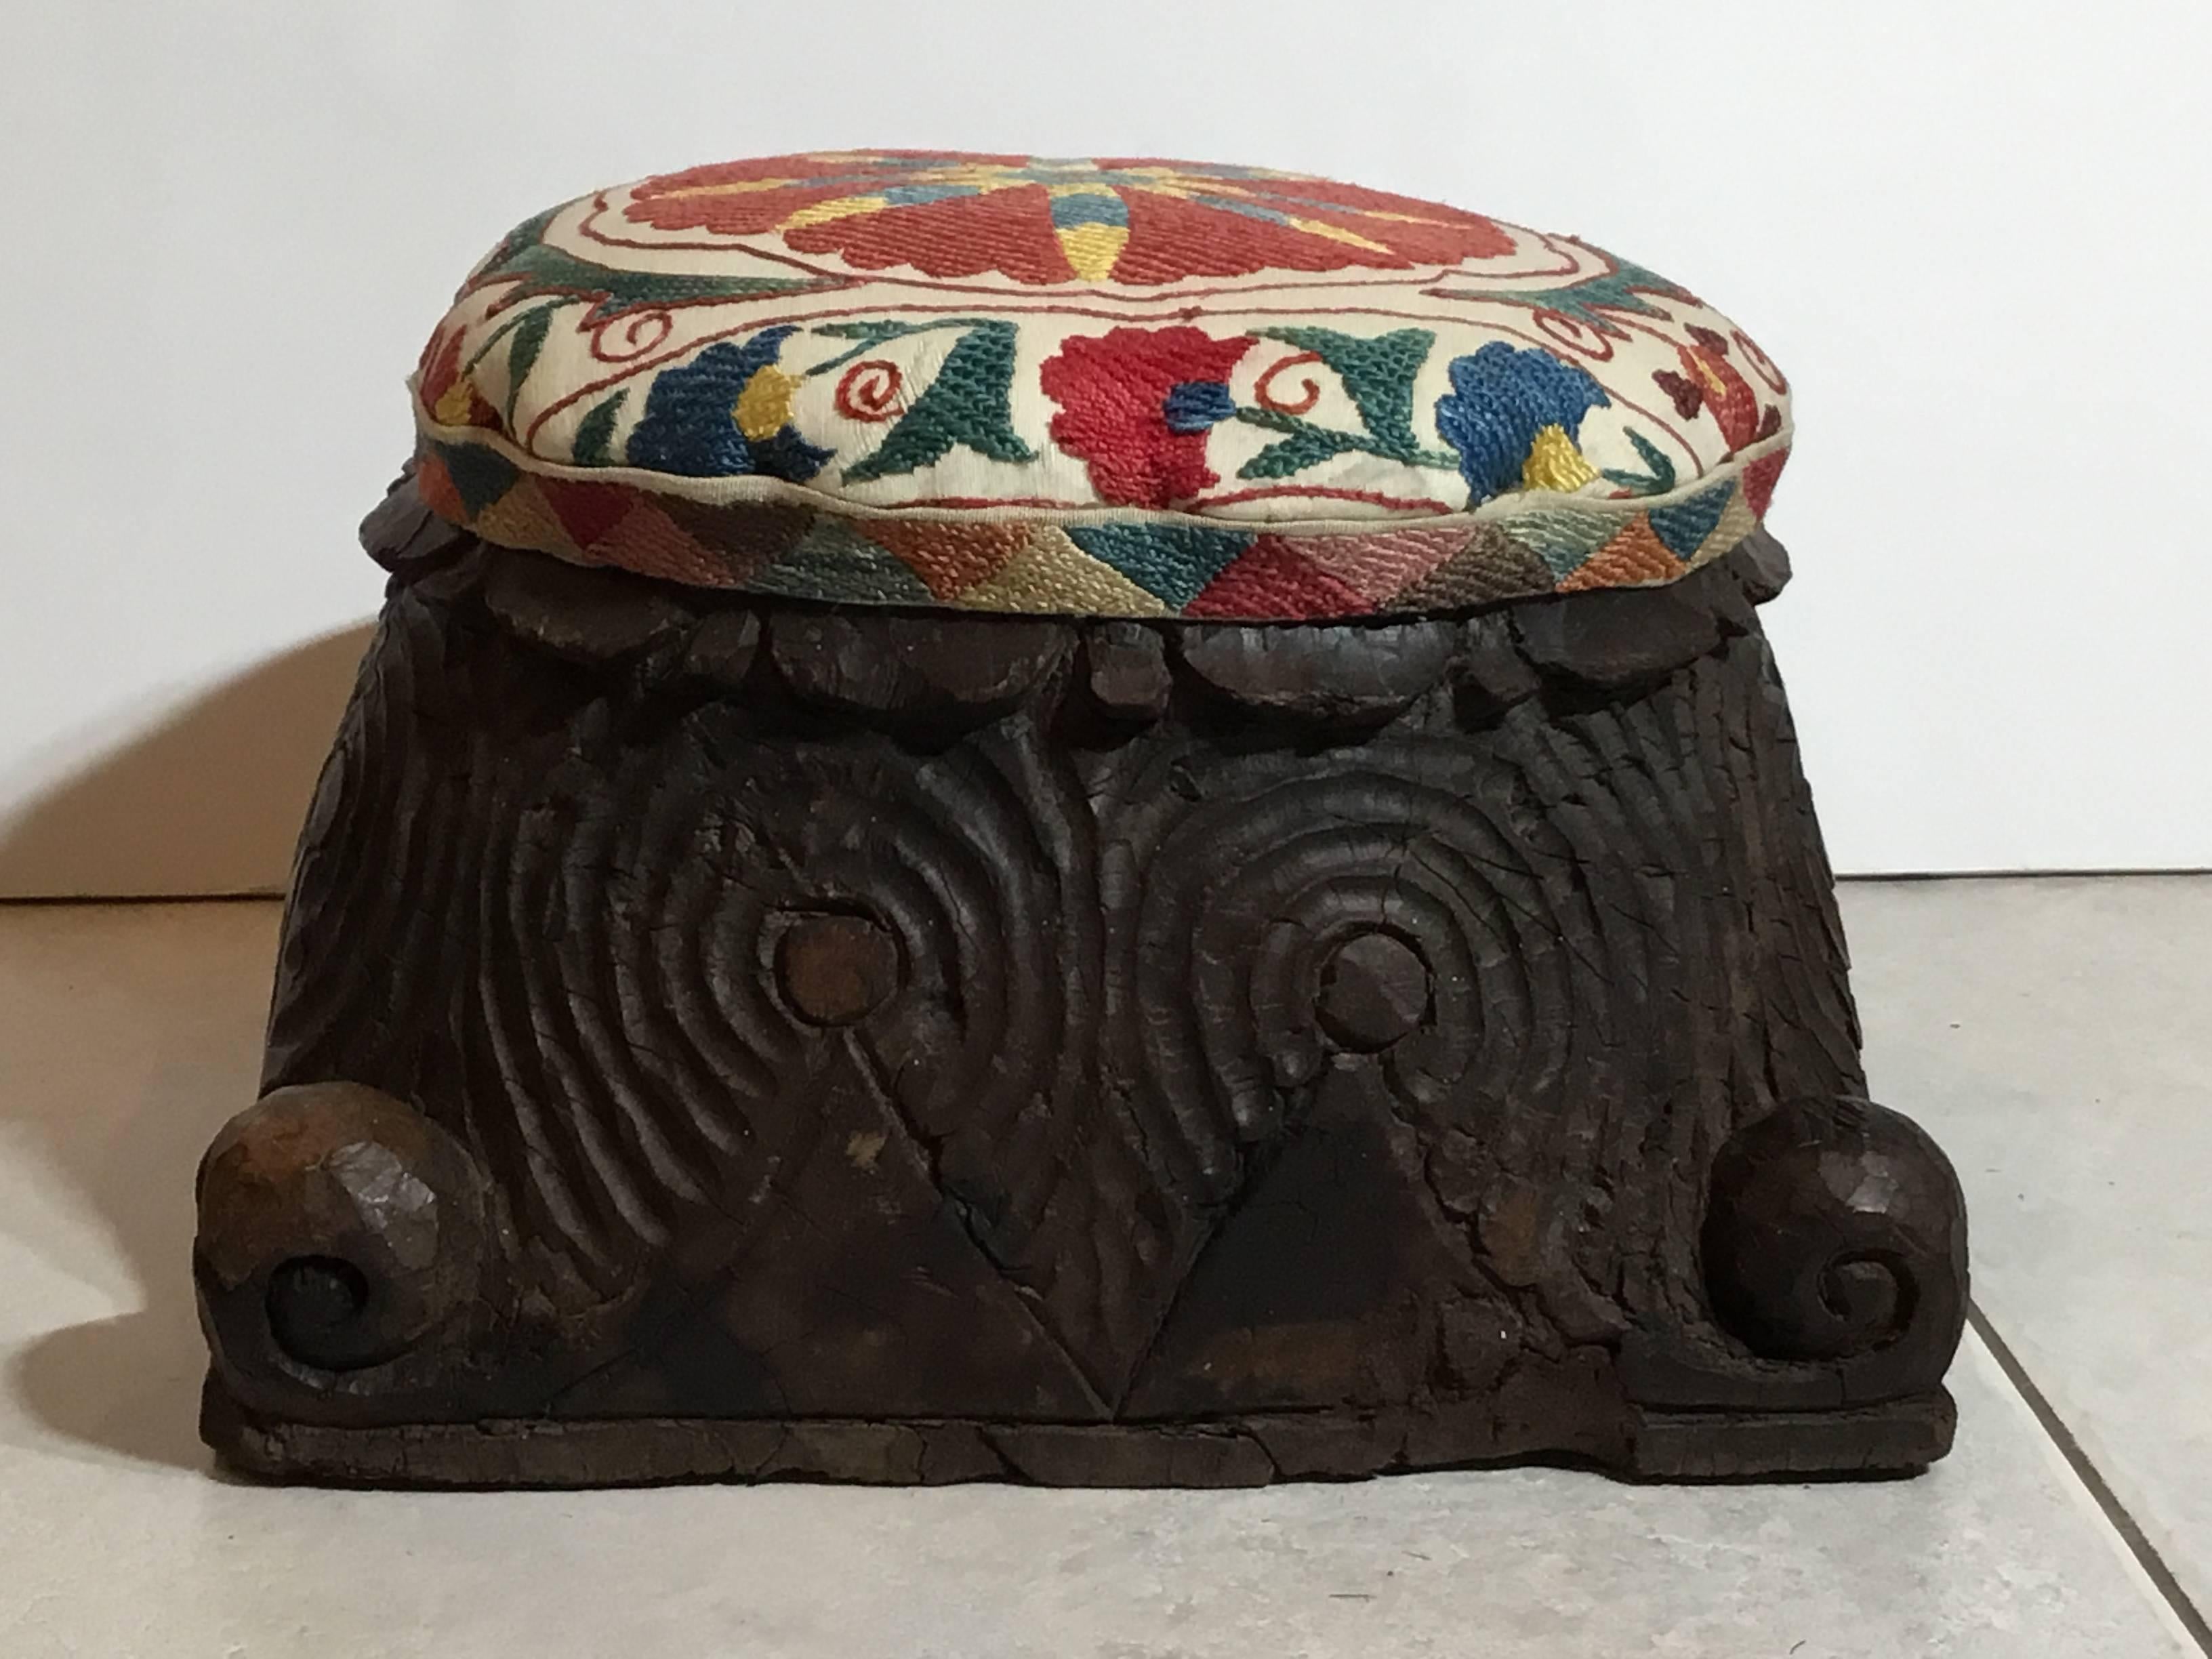 Carved Suzani Foot Stool